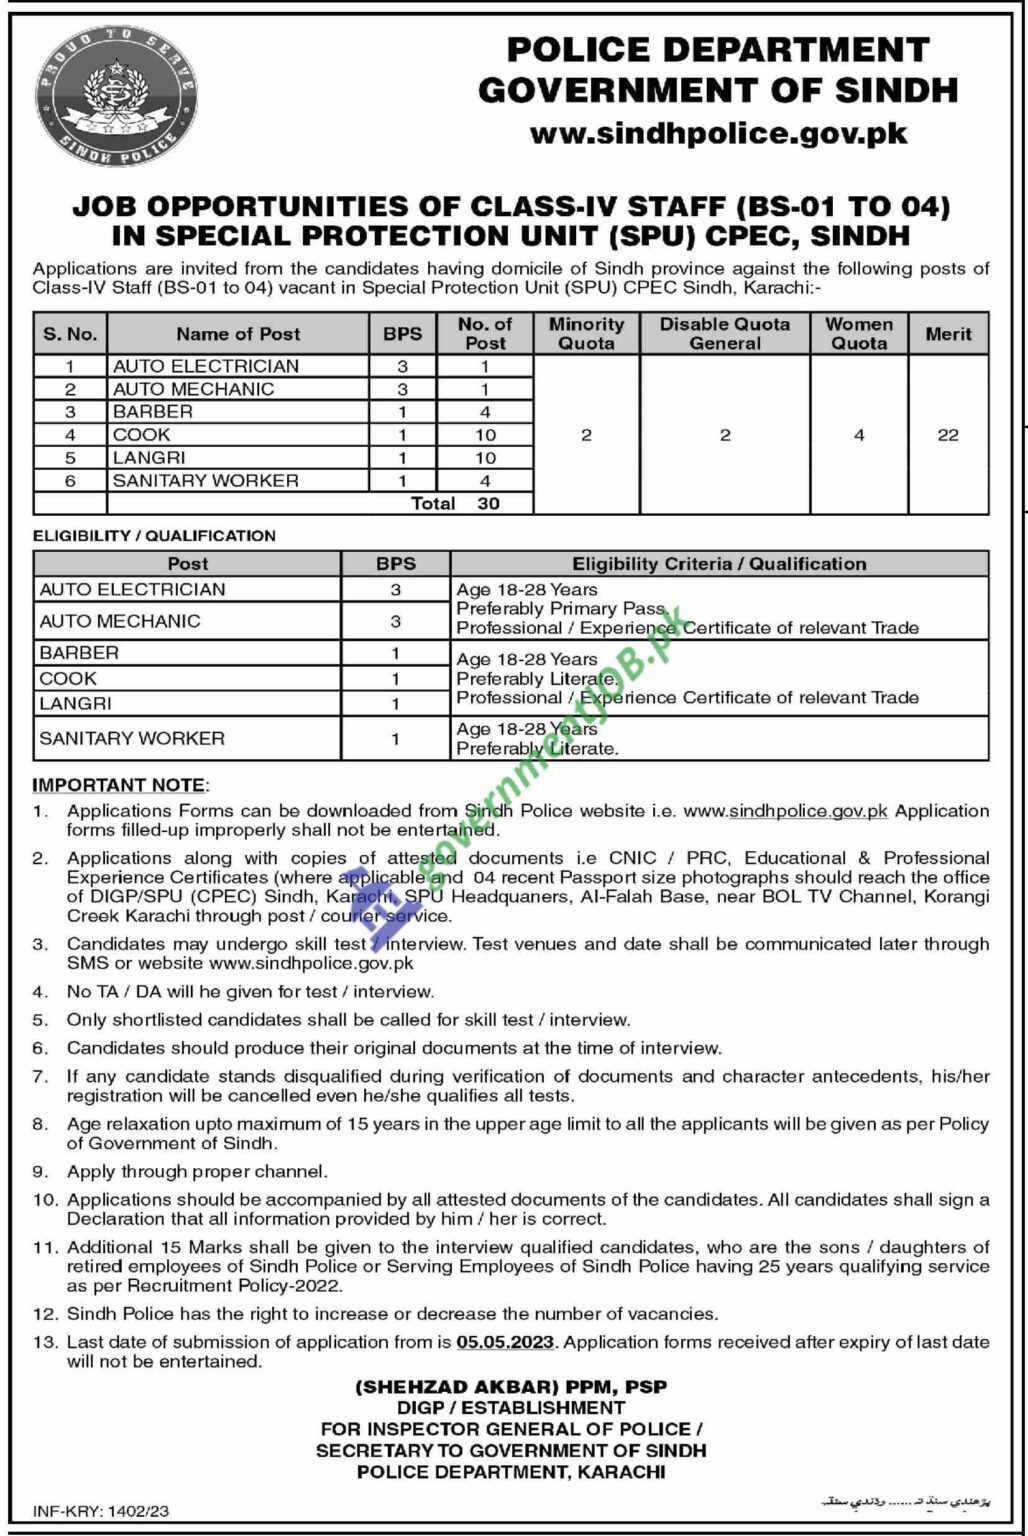 Jobs in SPU Police Special Protection Unit